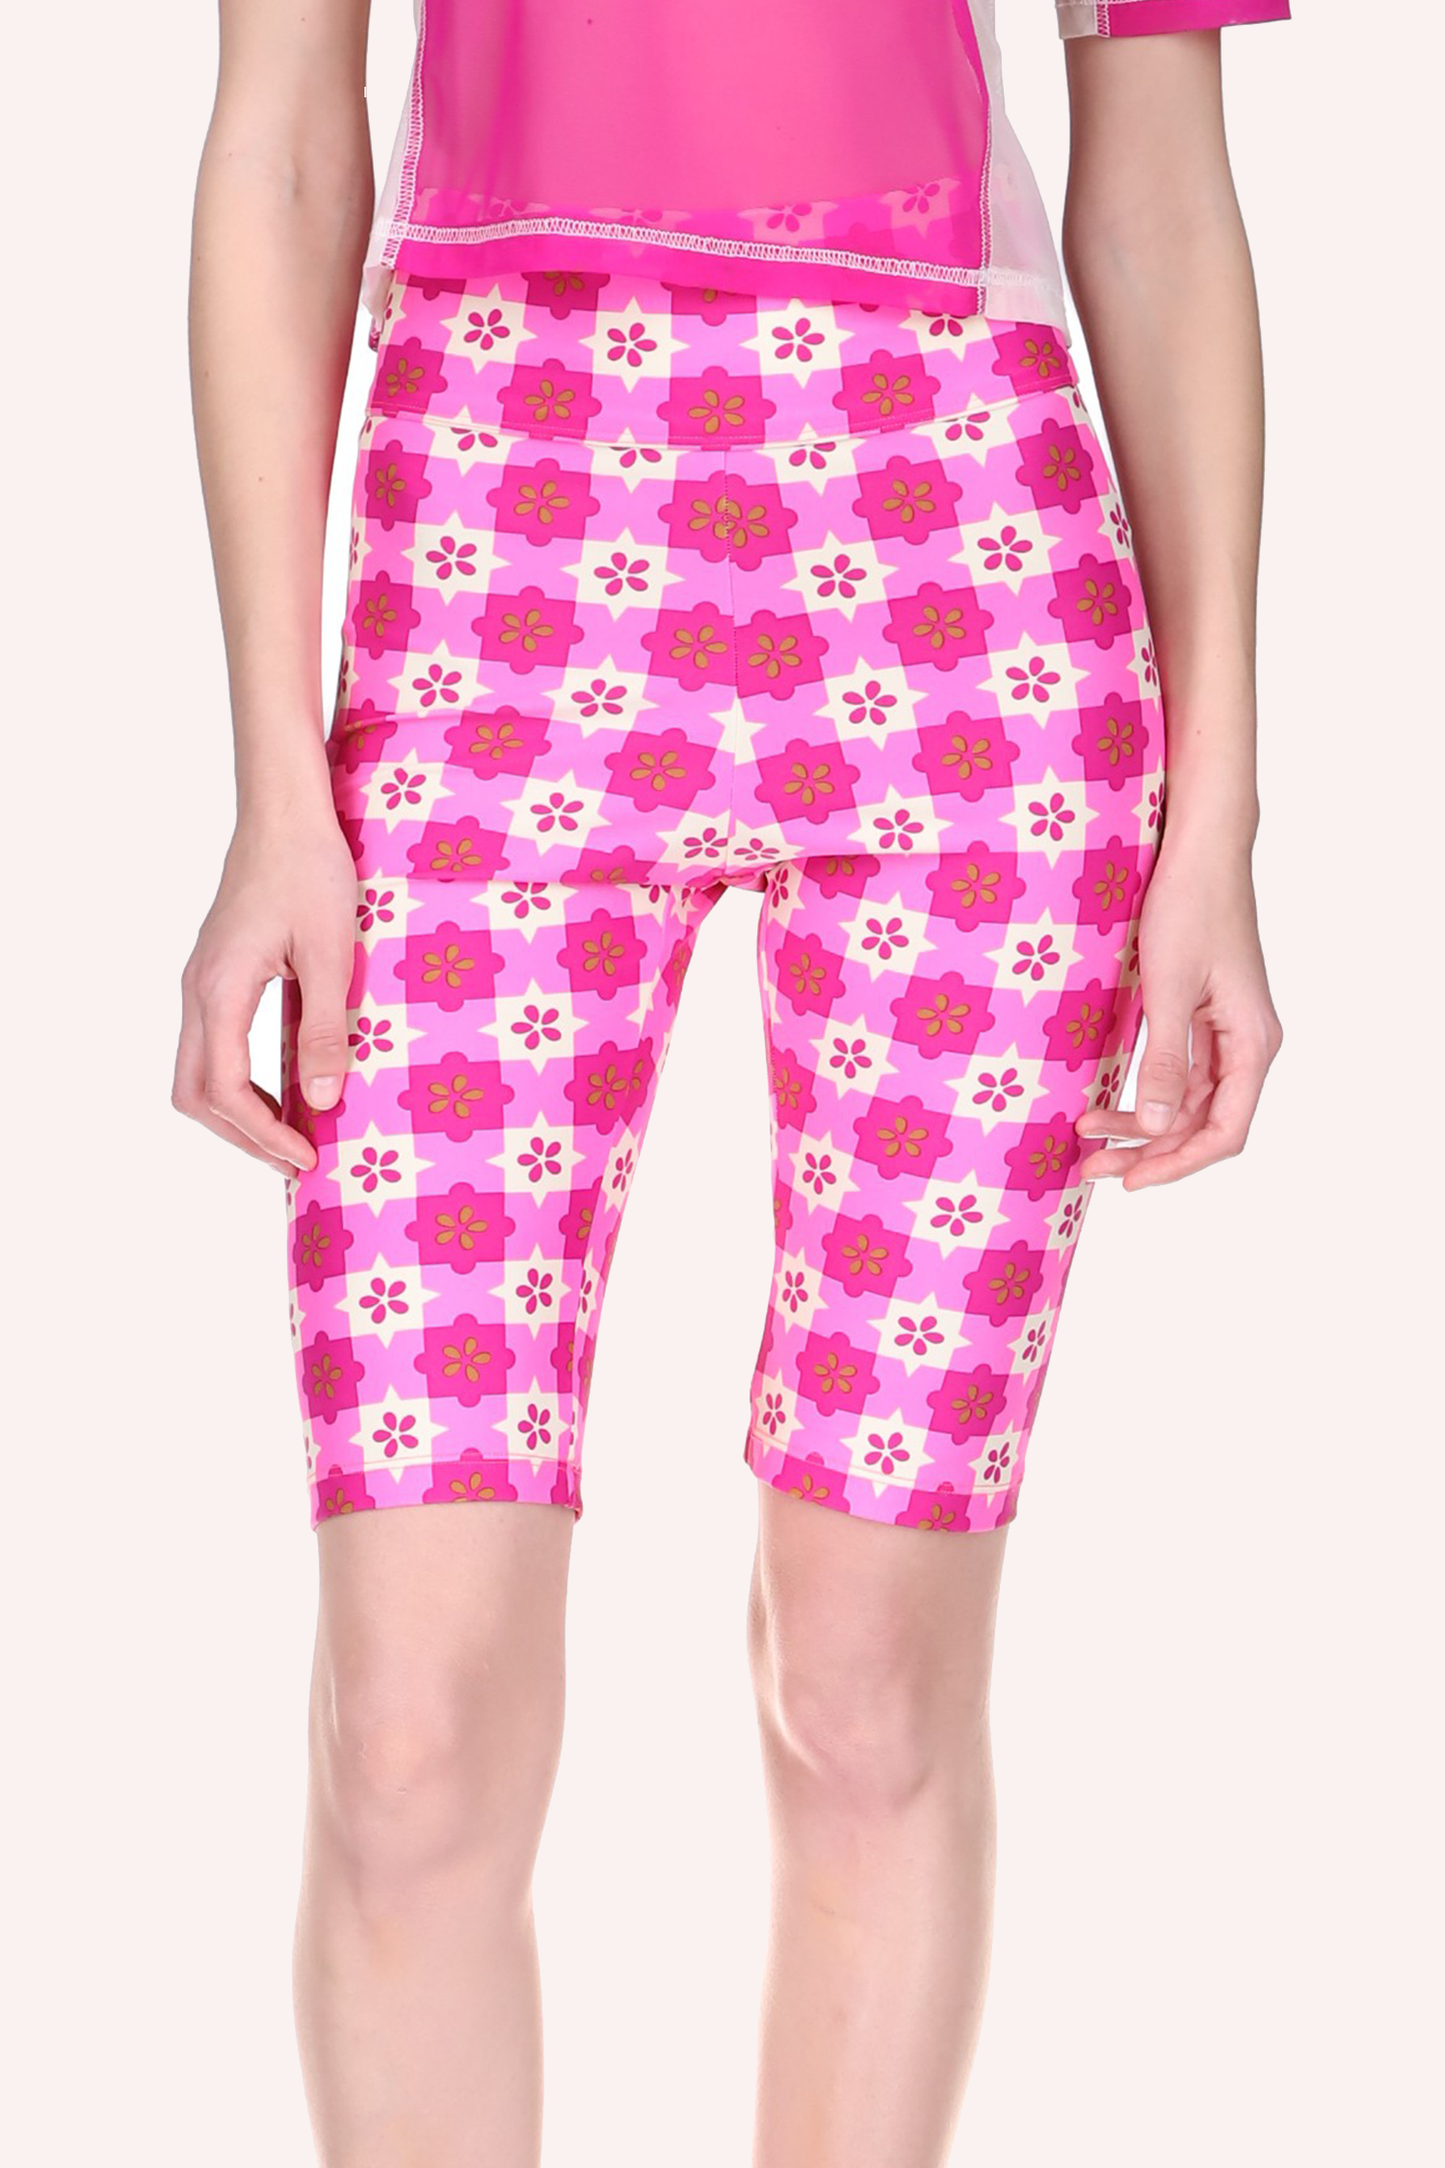 Utopian Gingham Bike Shorts Neon Pink features a pink and white star-shaped pattern